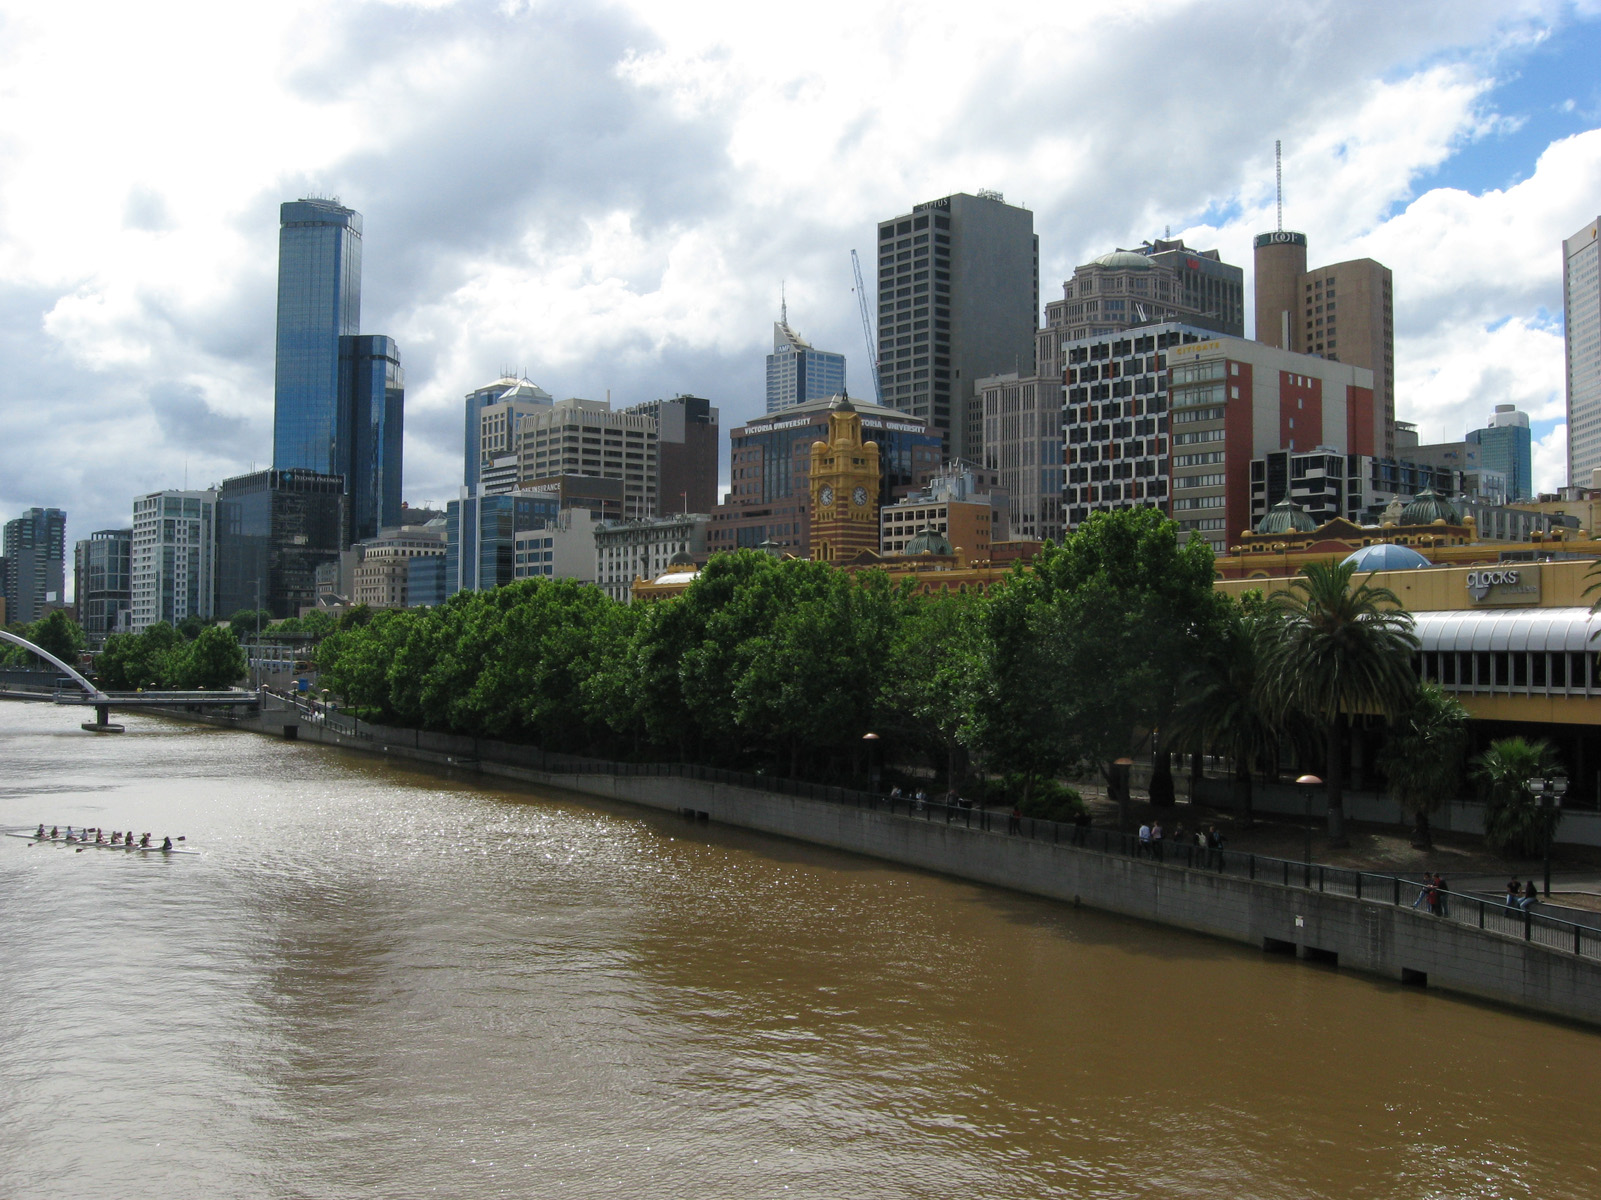 Flinders St Station by the Yarra & the business district behind it